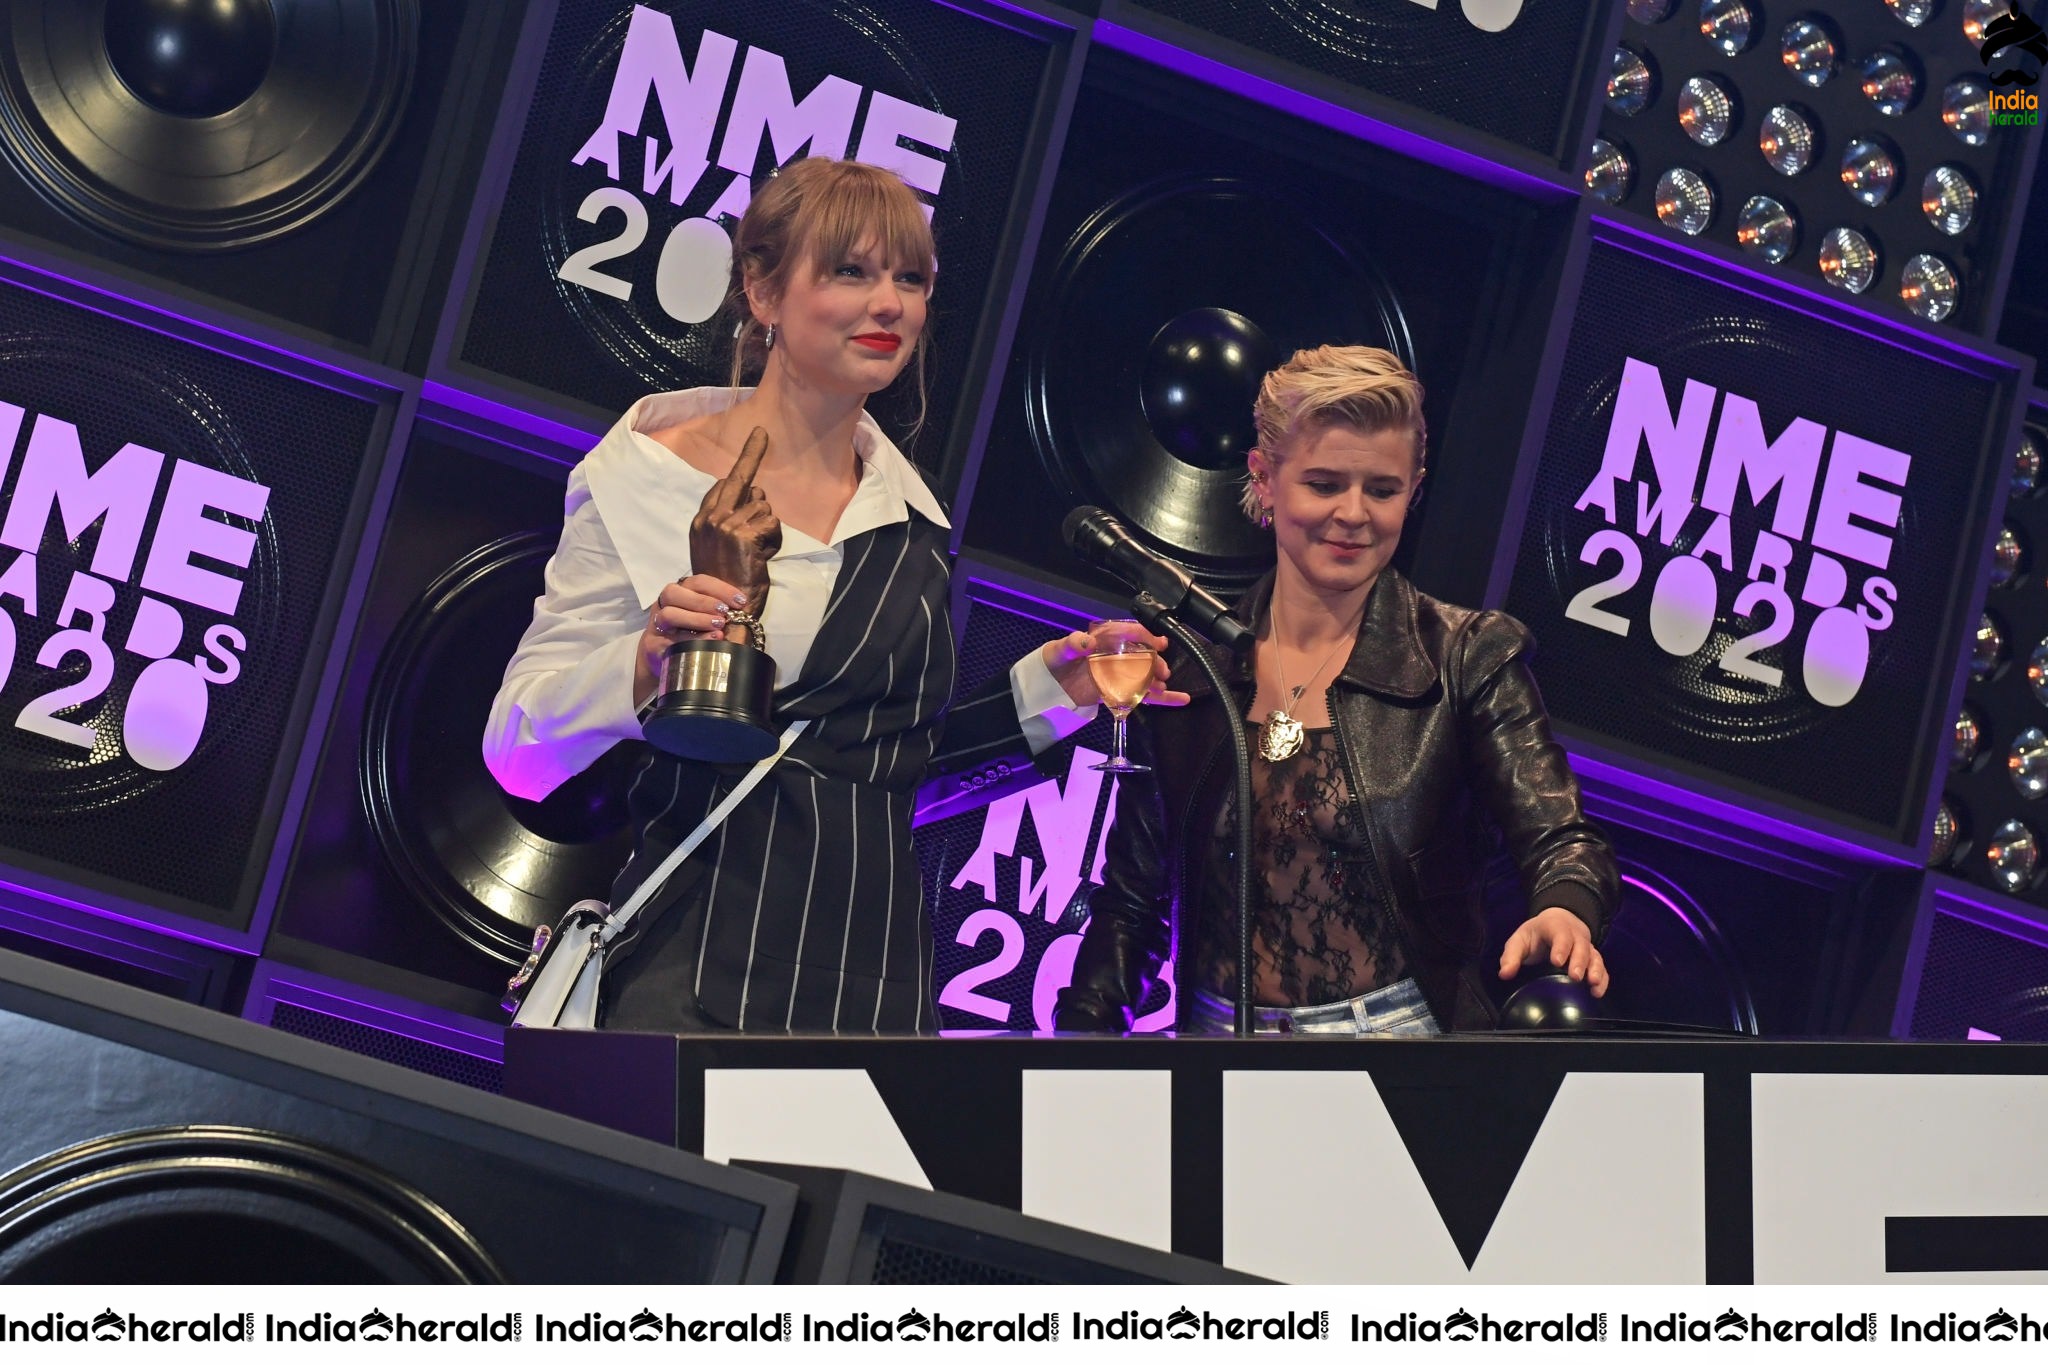 Taylor Swift at NME Awards 2020 in London